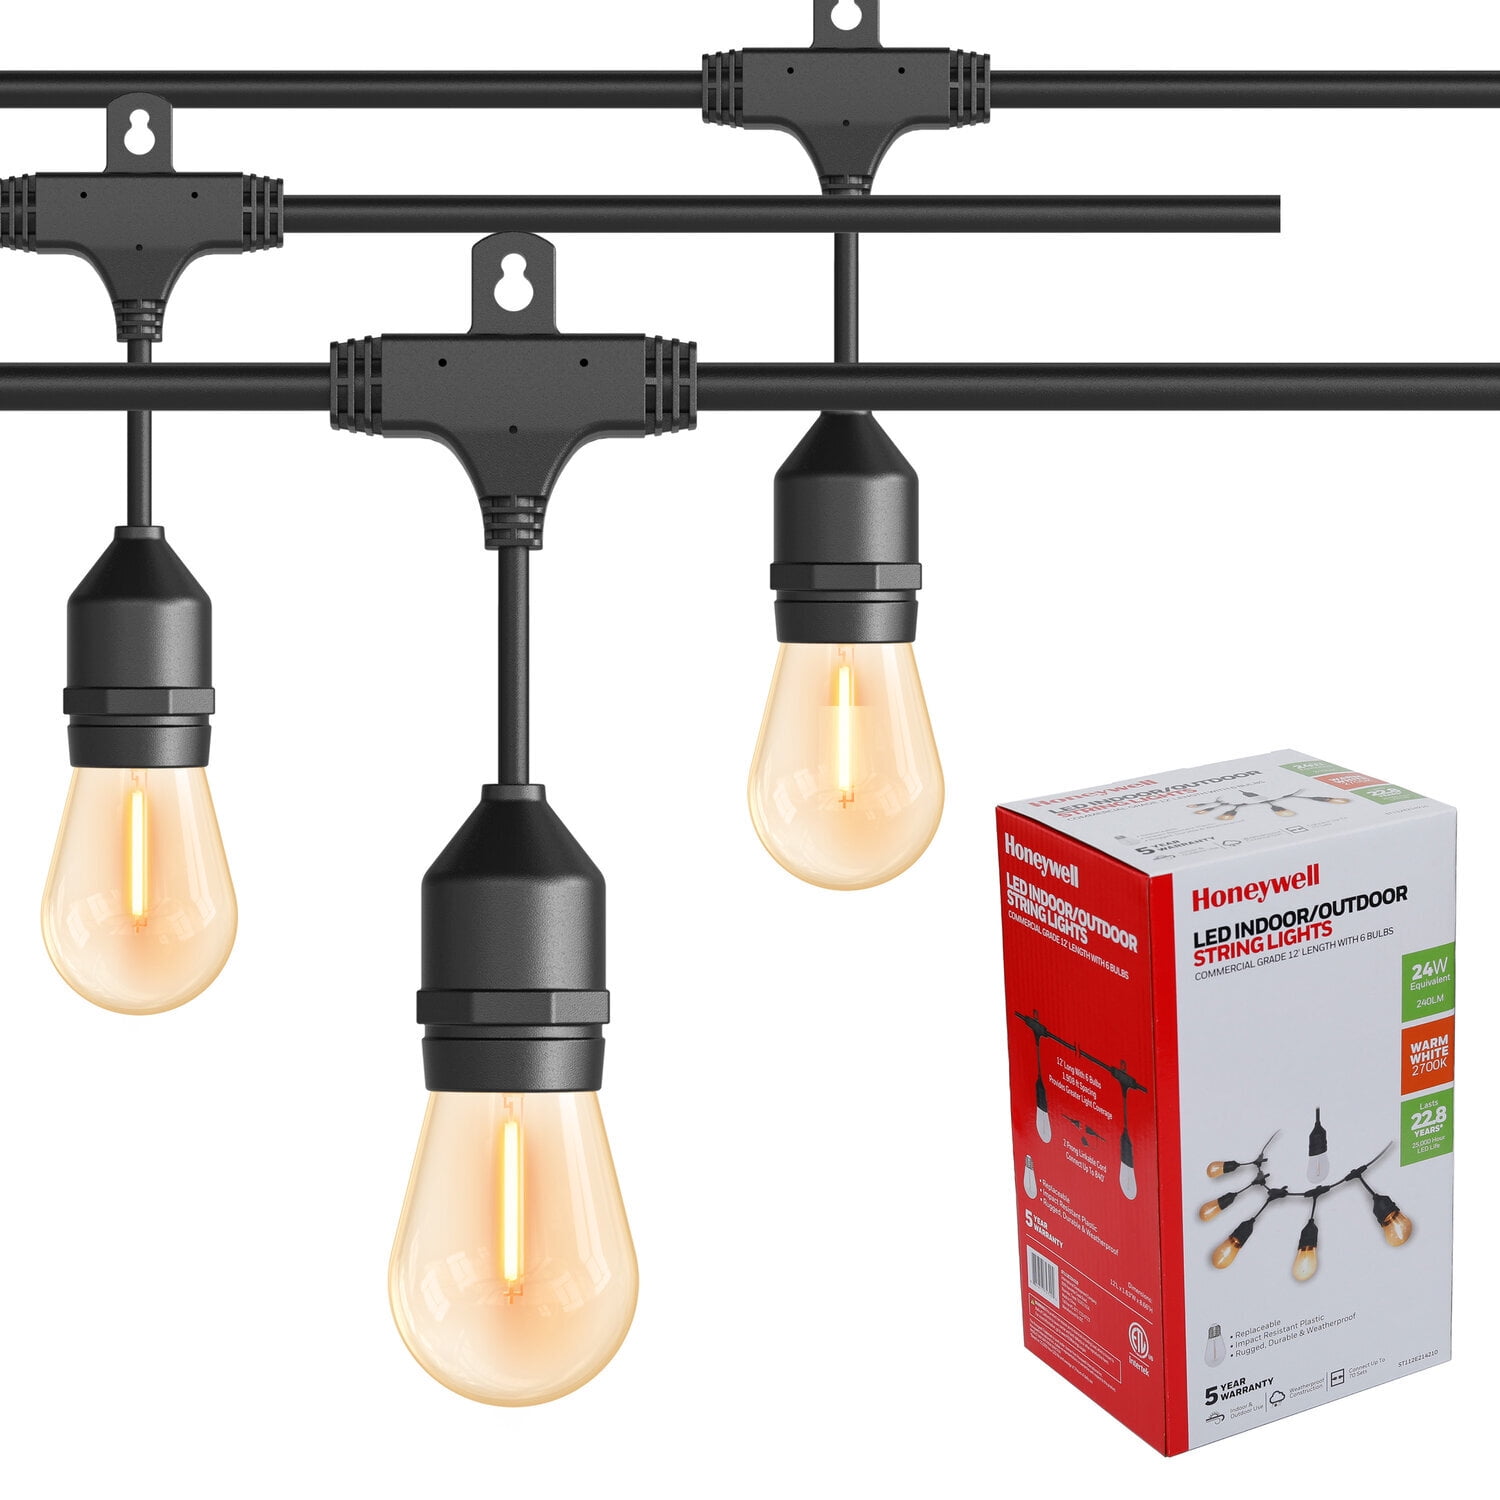 Honeywell 24' LED Plug-in String Lights With 12 E26 Bulbs, Indoor/Outdoor